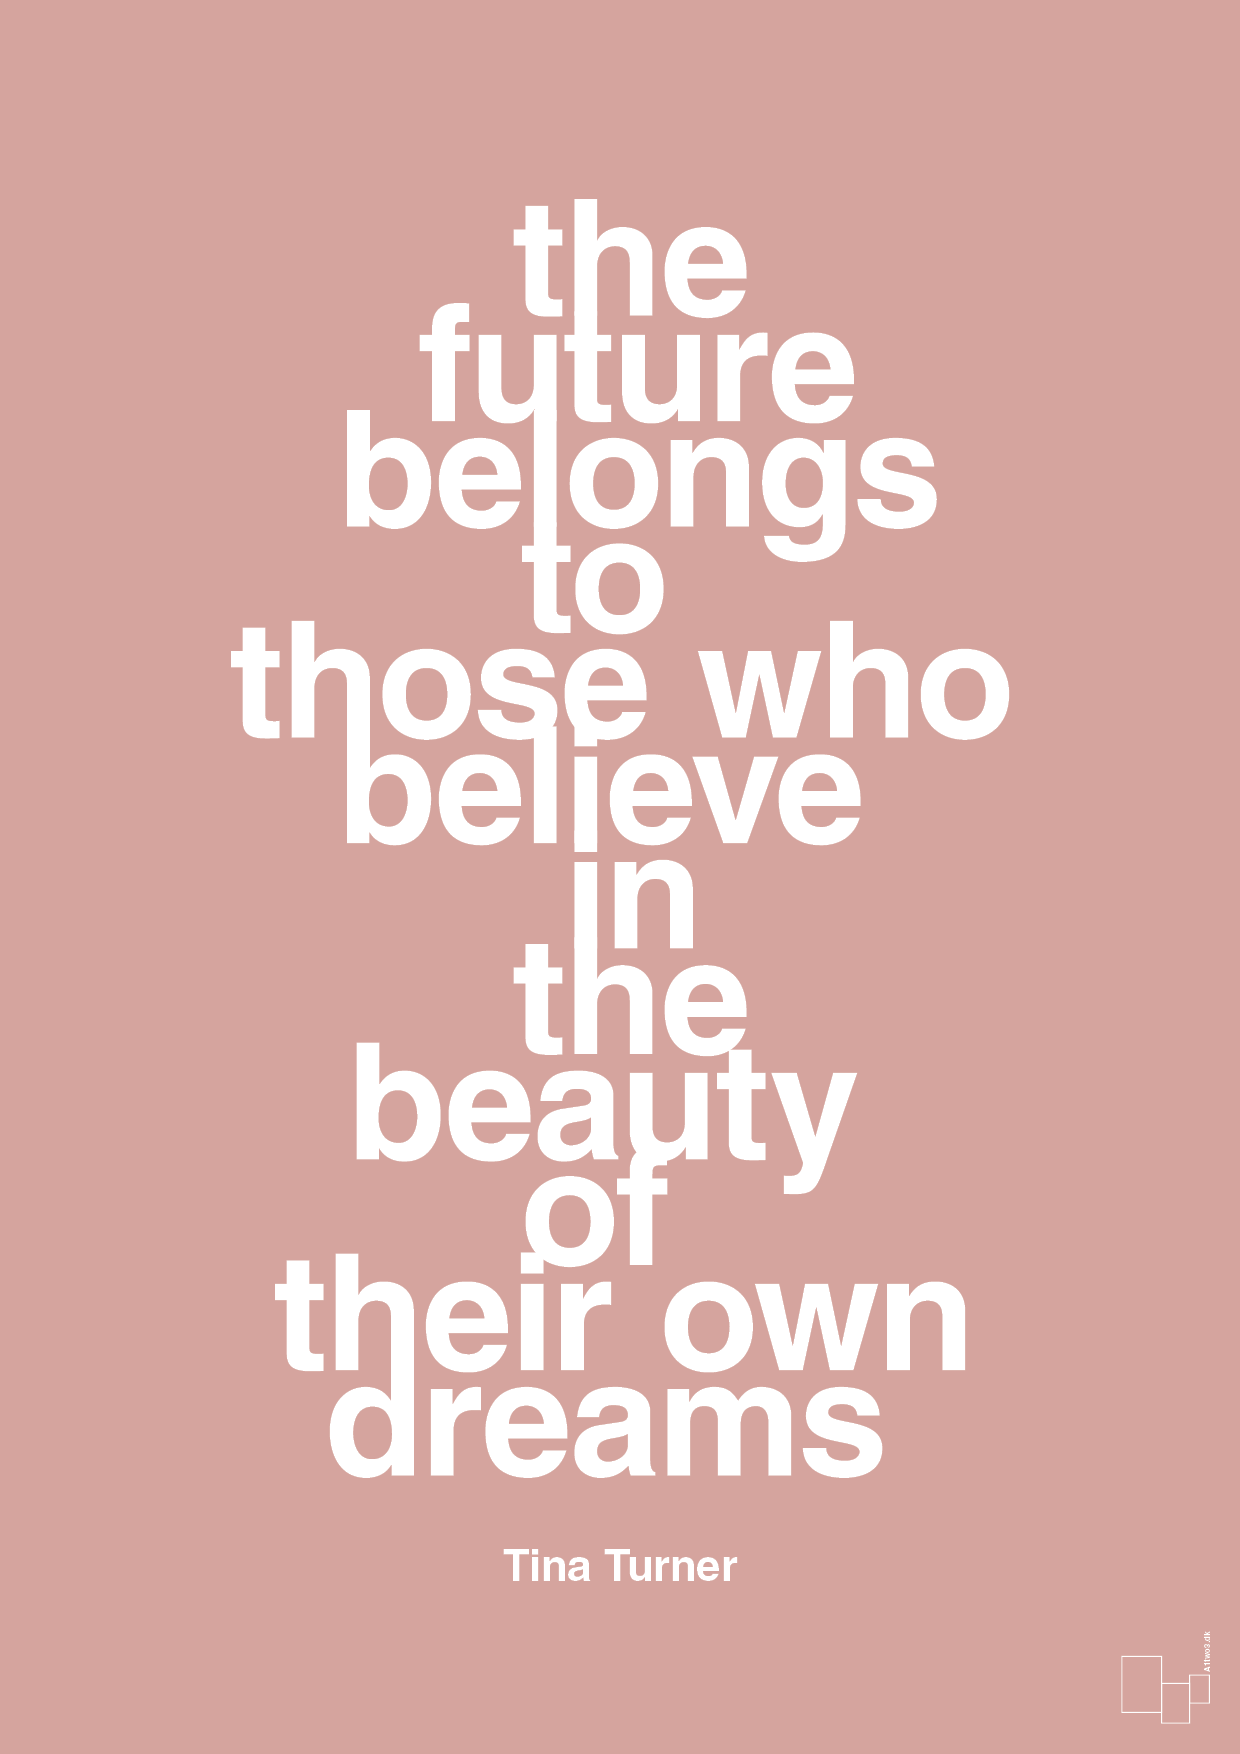 the future belongs to those who believe in the beauty of their own dreams - Plakat med Citater i Bubble Shell